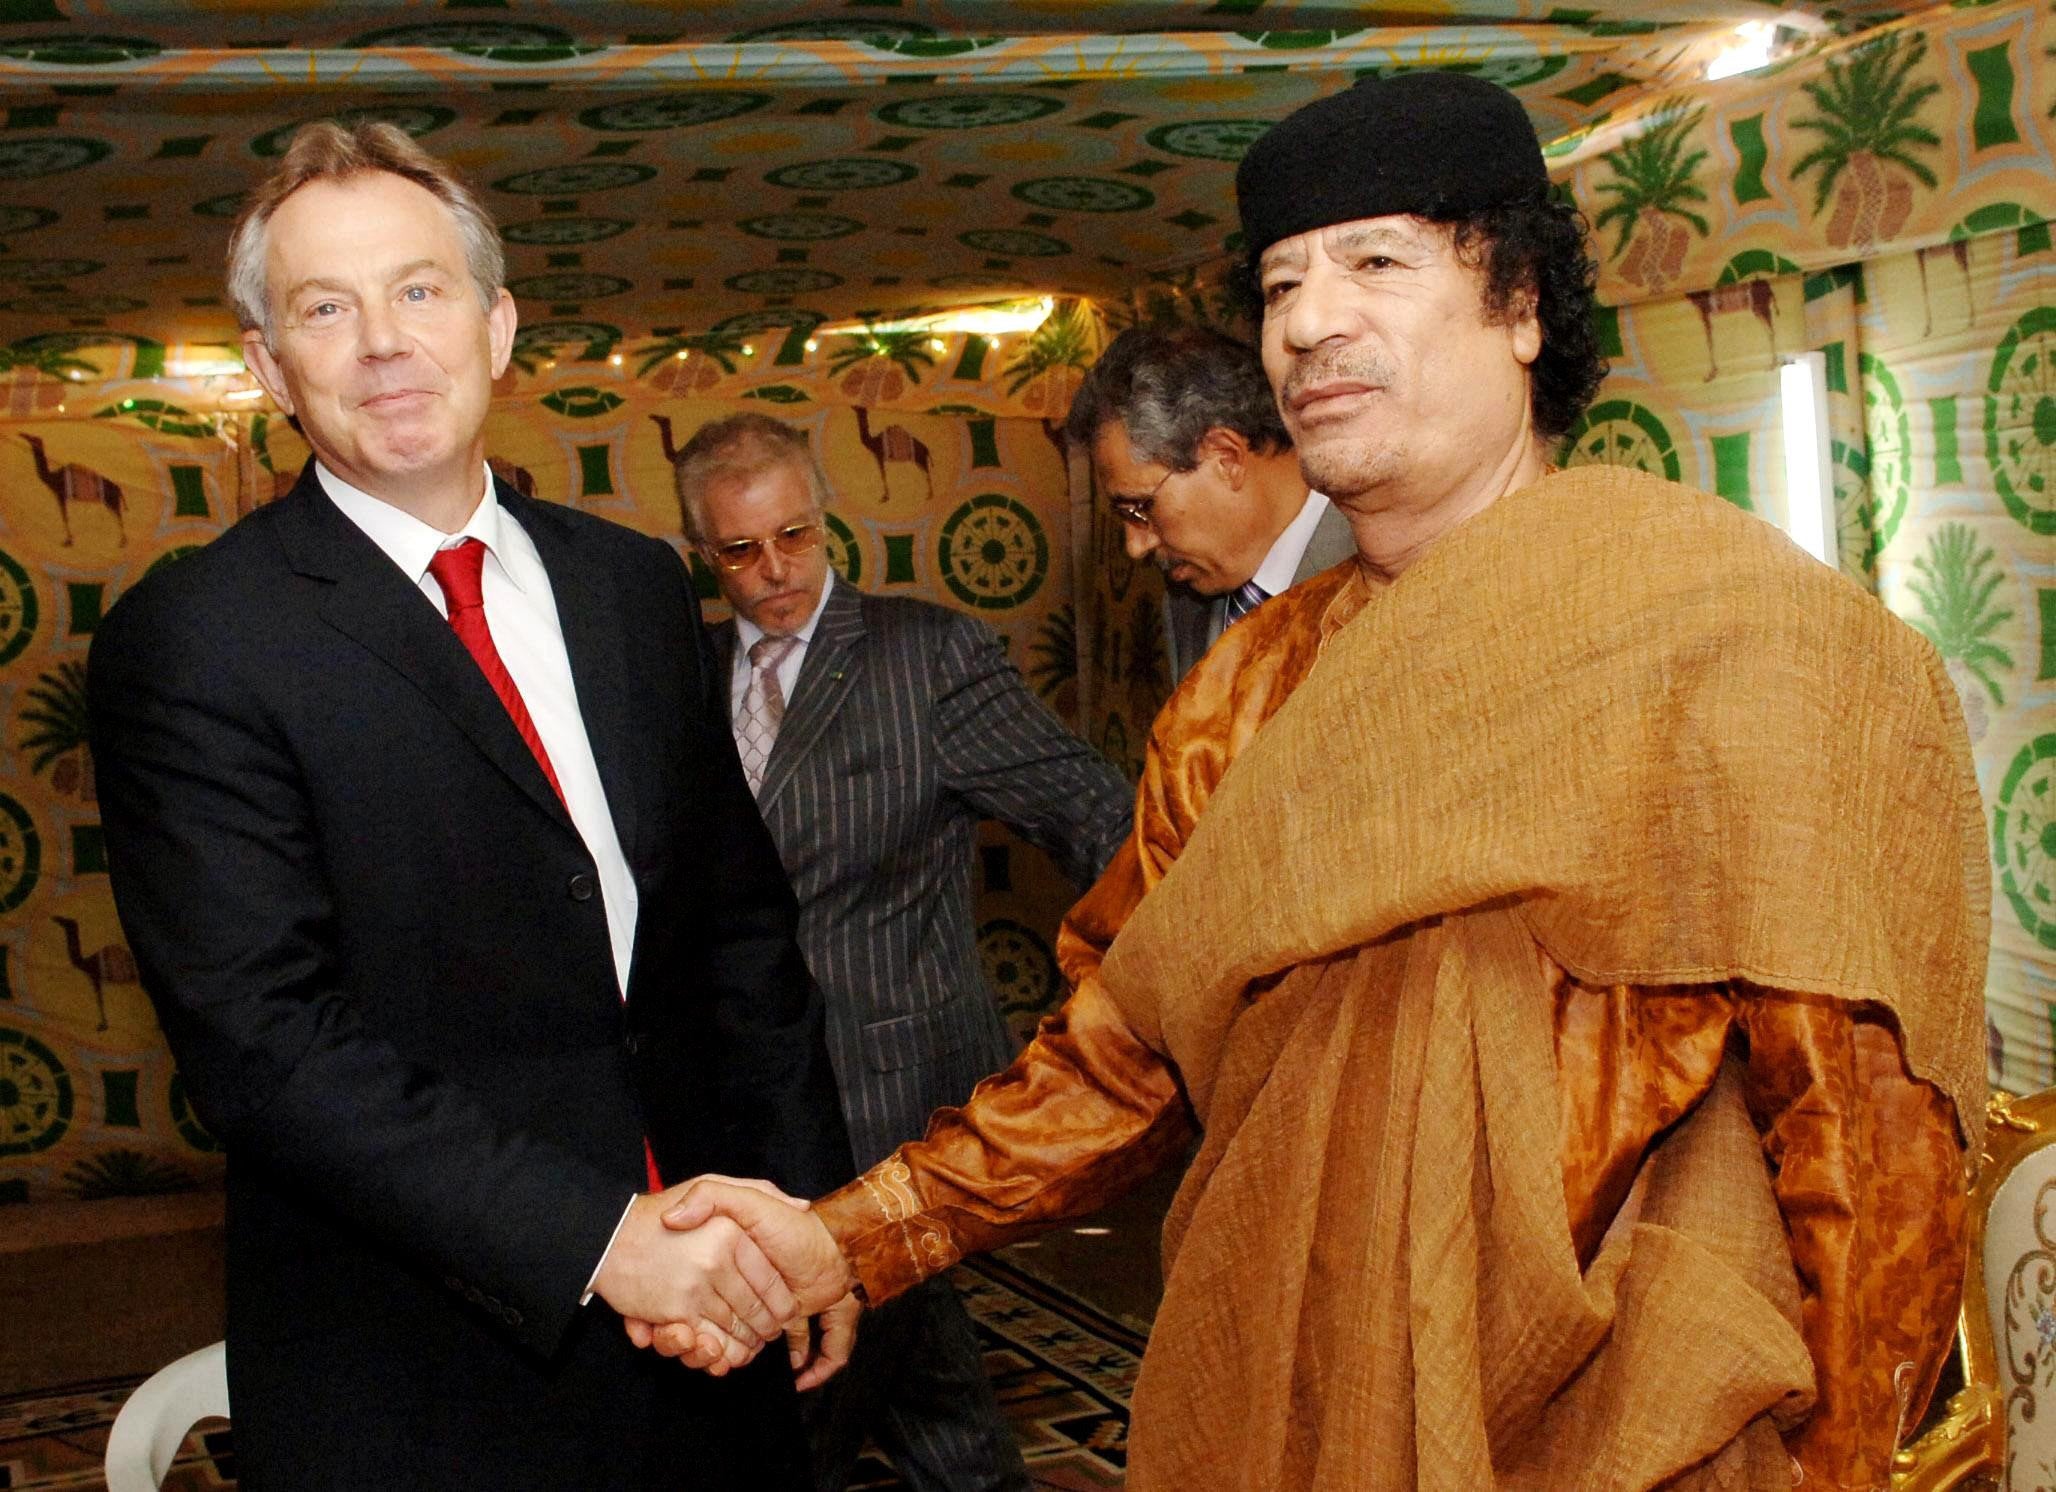 Tony Blair and Colonel Gaddafi shake hands during the 2004 ‘deal in the desert’